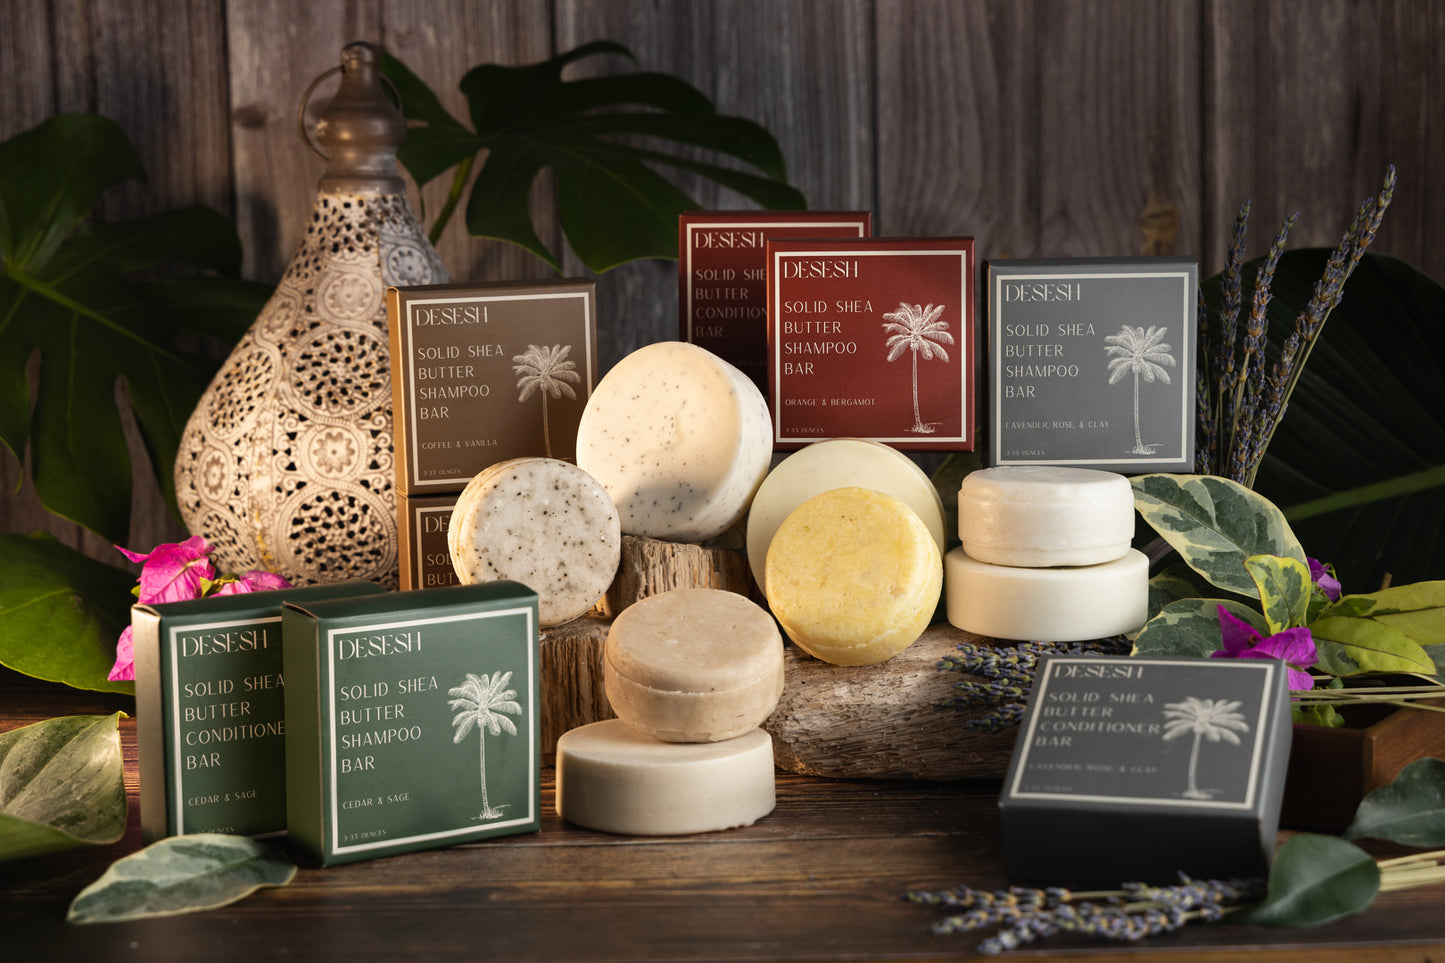 This image shows salon quality Shea Butter solid shampoo bars with plastic free biodegradable packaging for a more sustainable eco friendly zero waste hair care routine. Shown here is the full Desesh collection of solid Shea Butter shampoo and conditioner bars